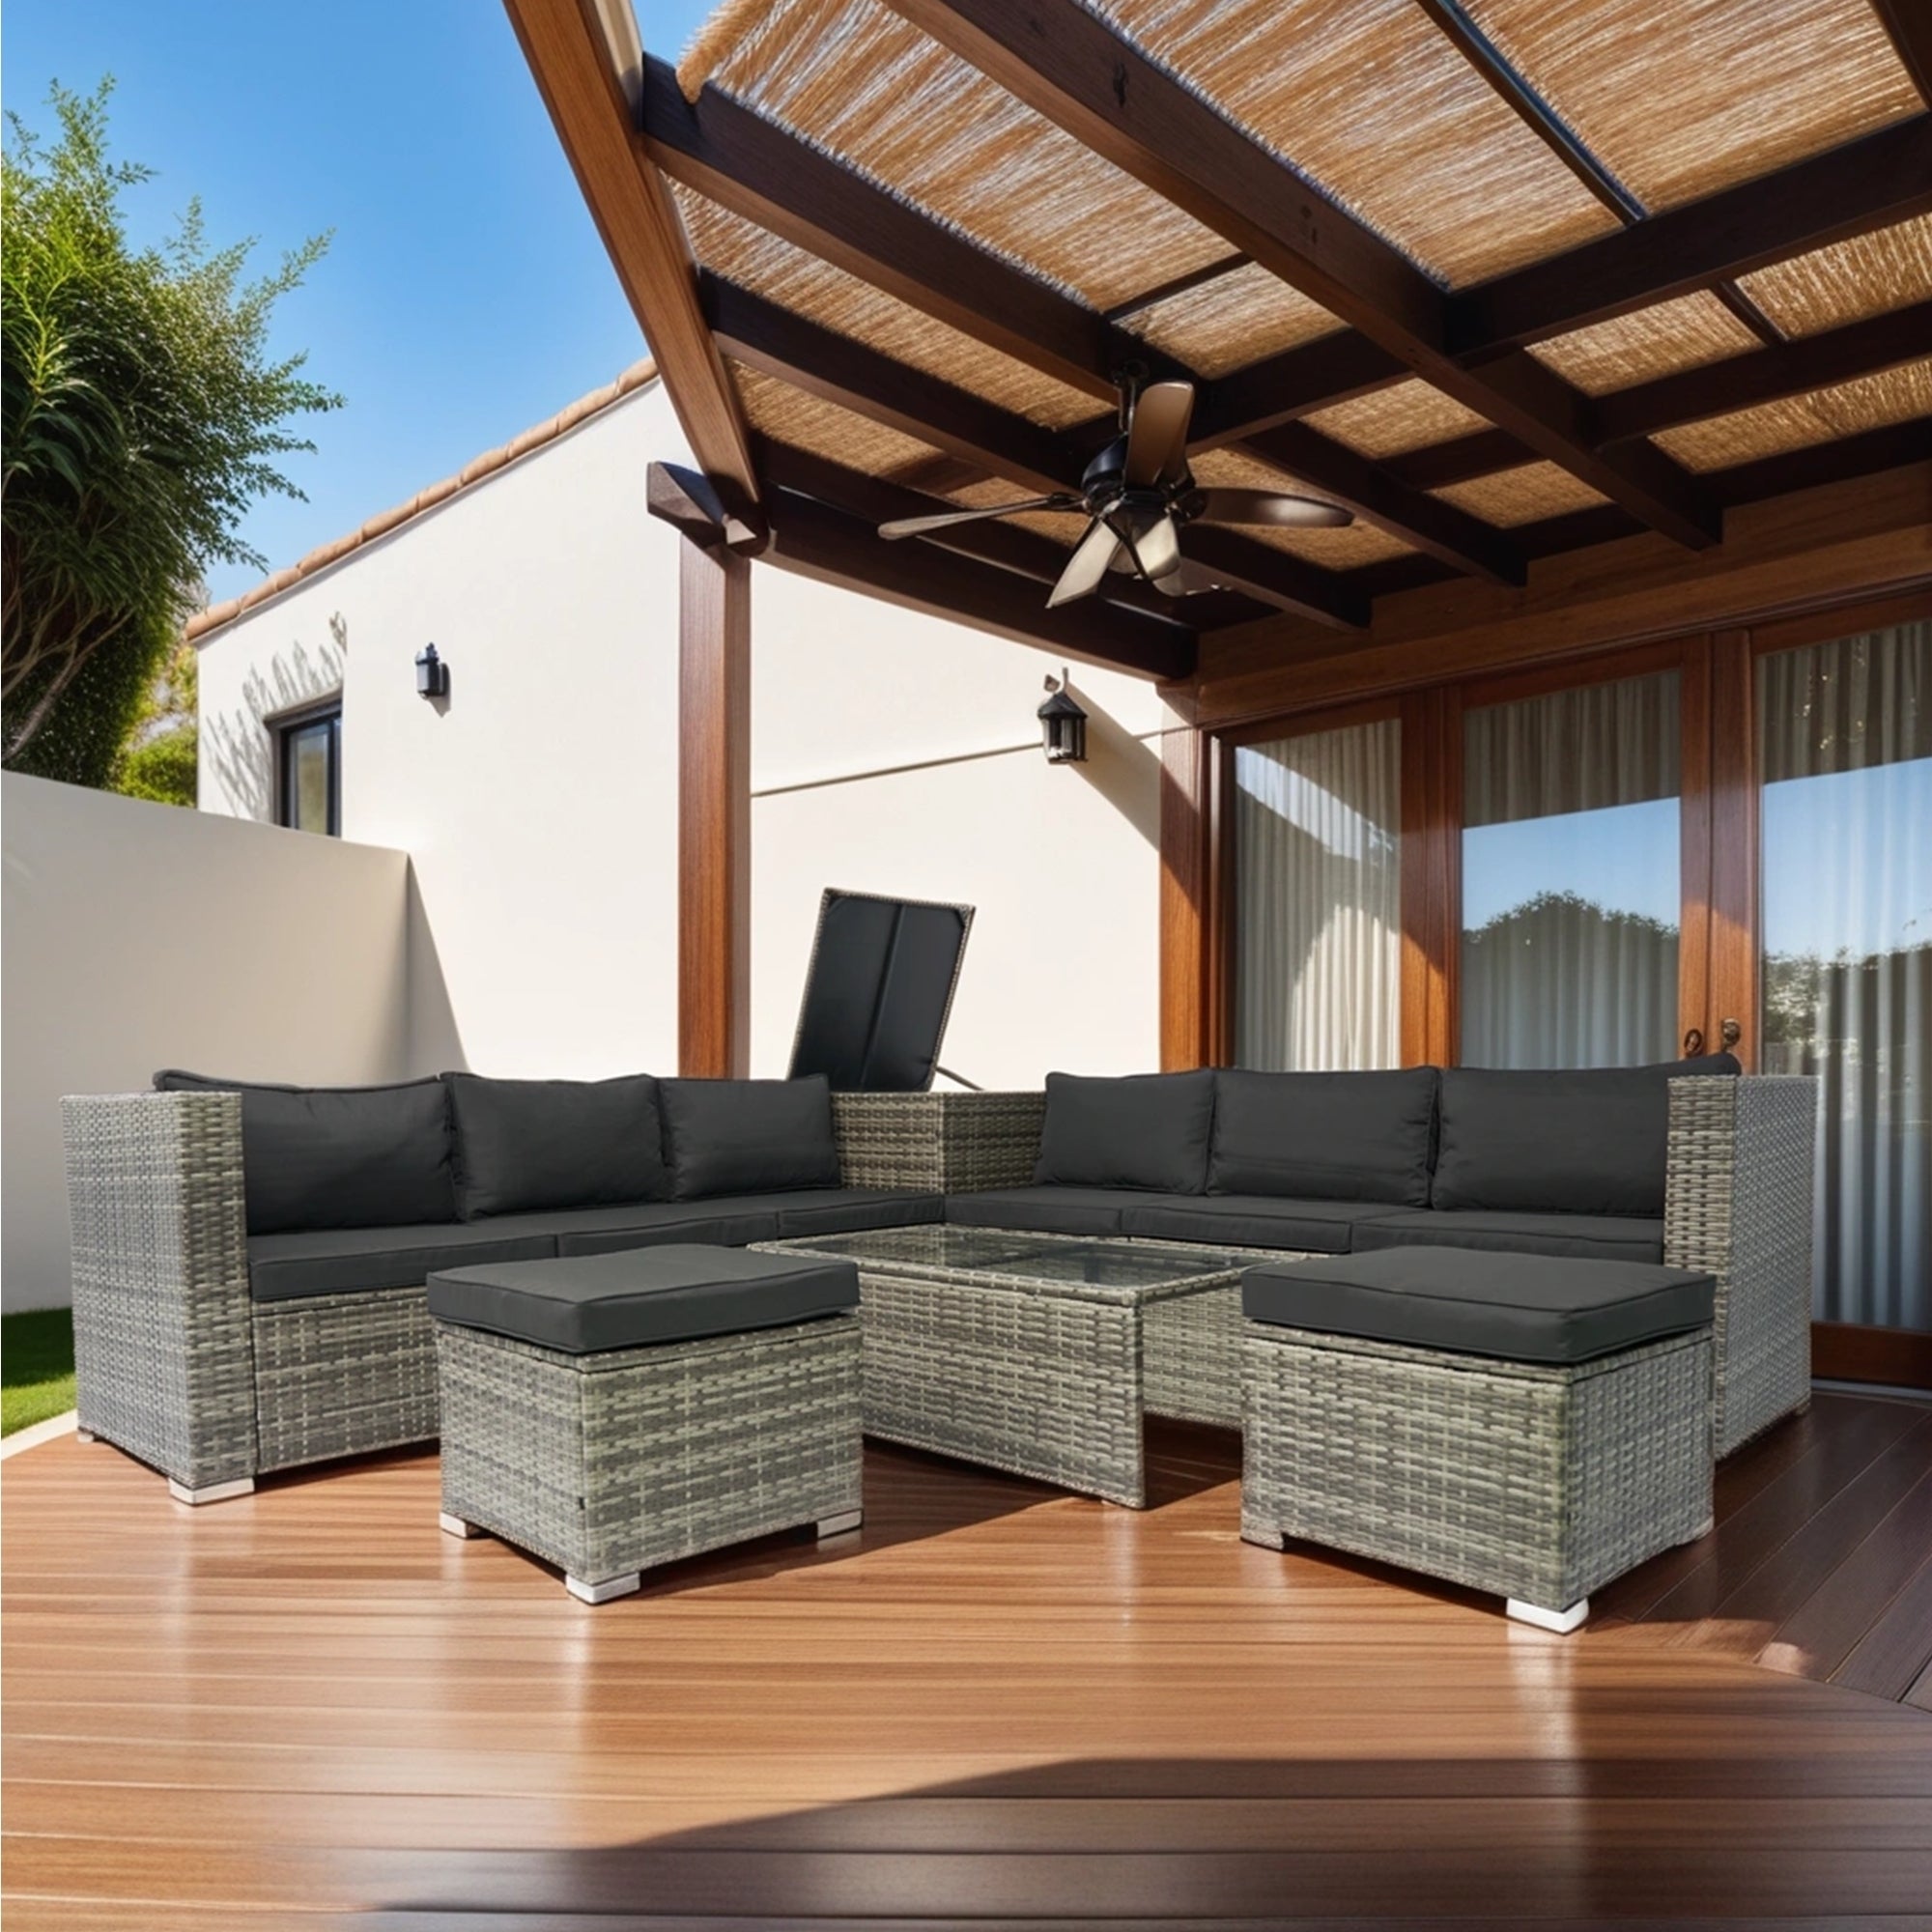 🆓🚛 8 Piece Patio Sectional Wicker Rattan Outdoor Furniture Sofa Set With 1 Storage Box Under Seat and Cushion Box Gray Wicker + Black Cushion + Clear Glass Top